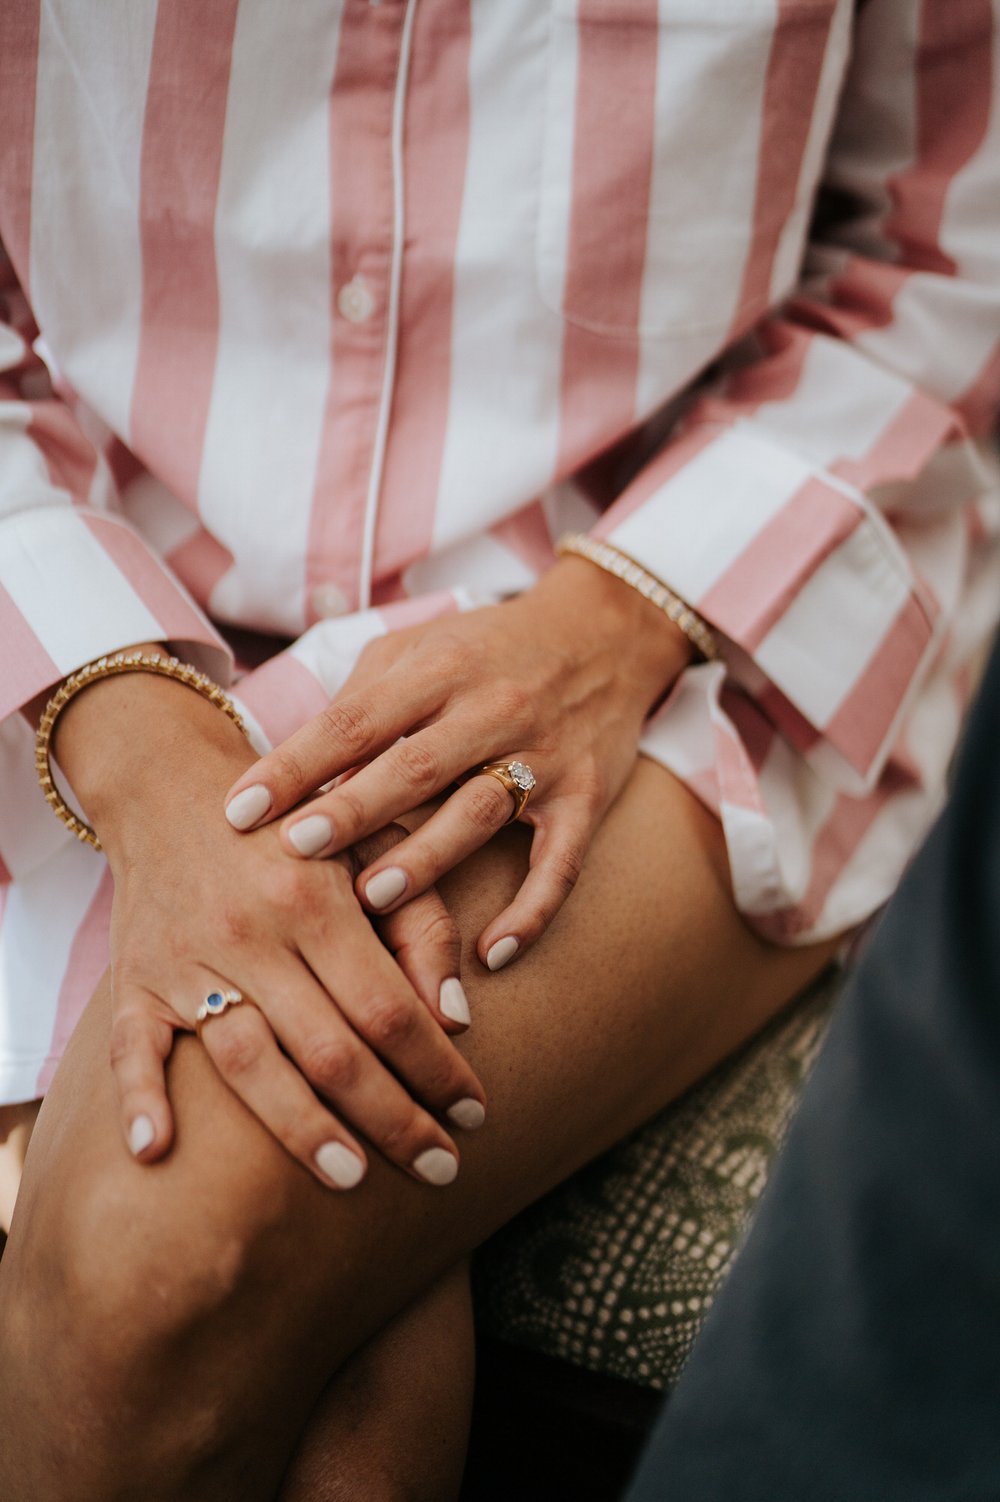 Bride sits in her striped robes and crosses her hands on her lap, with her engagement ring clearly visible